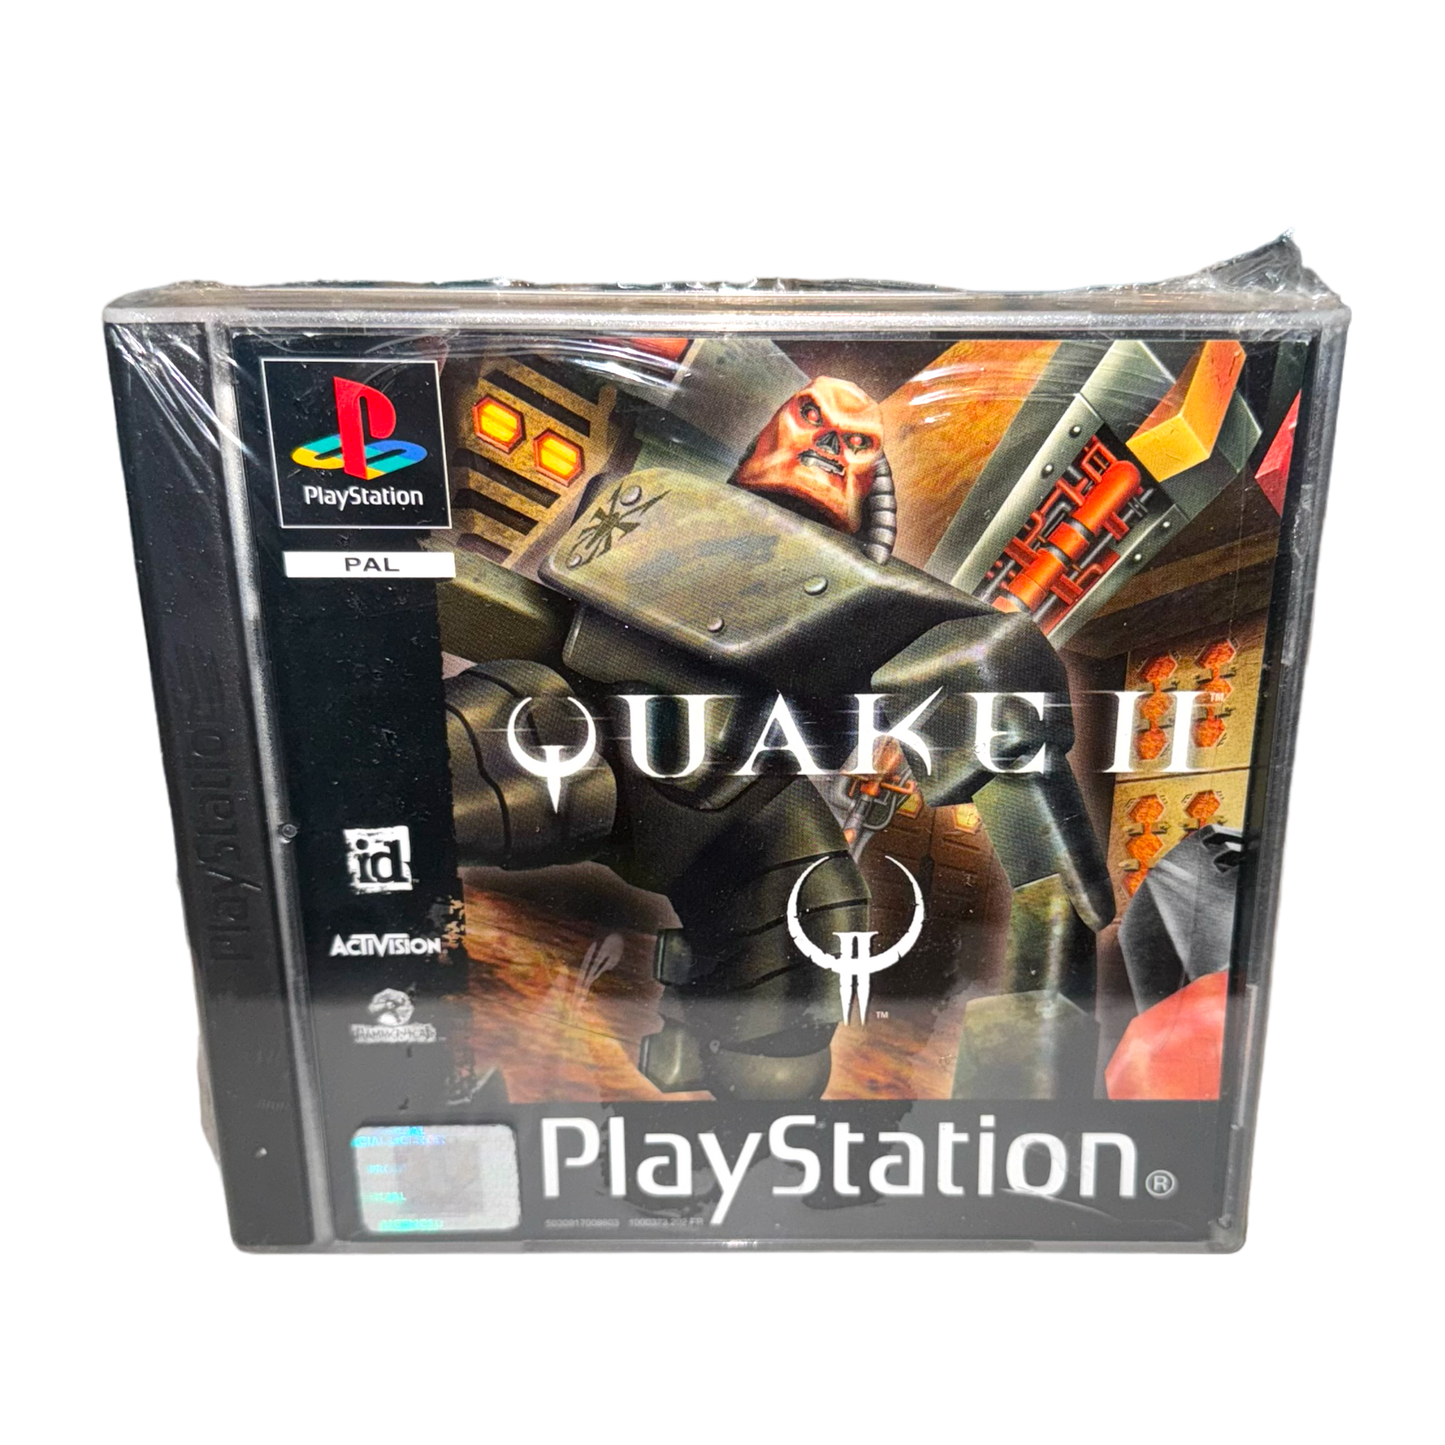 PS1 - Playstation 1 - QUAKE II Factory Sealed (PAL) Euro Release